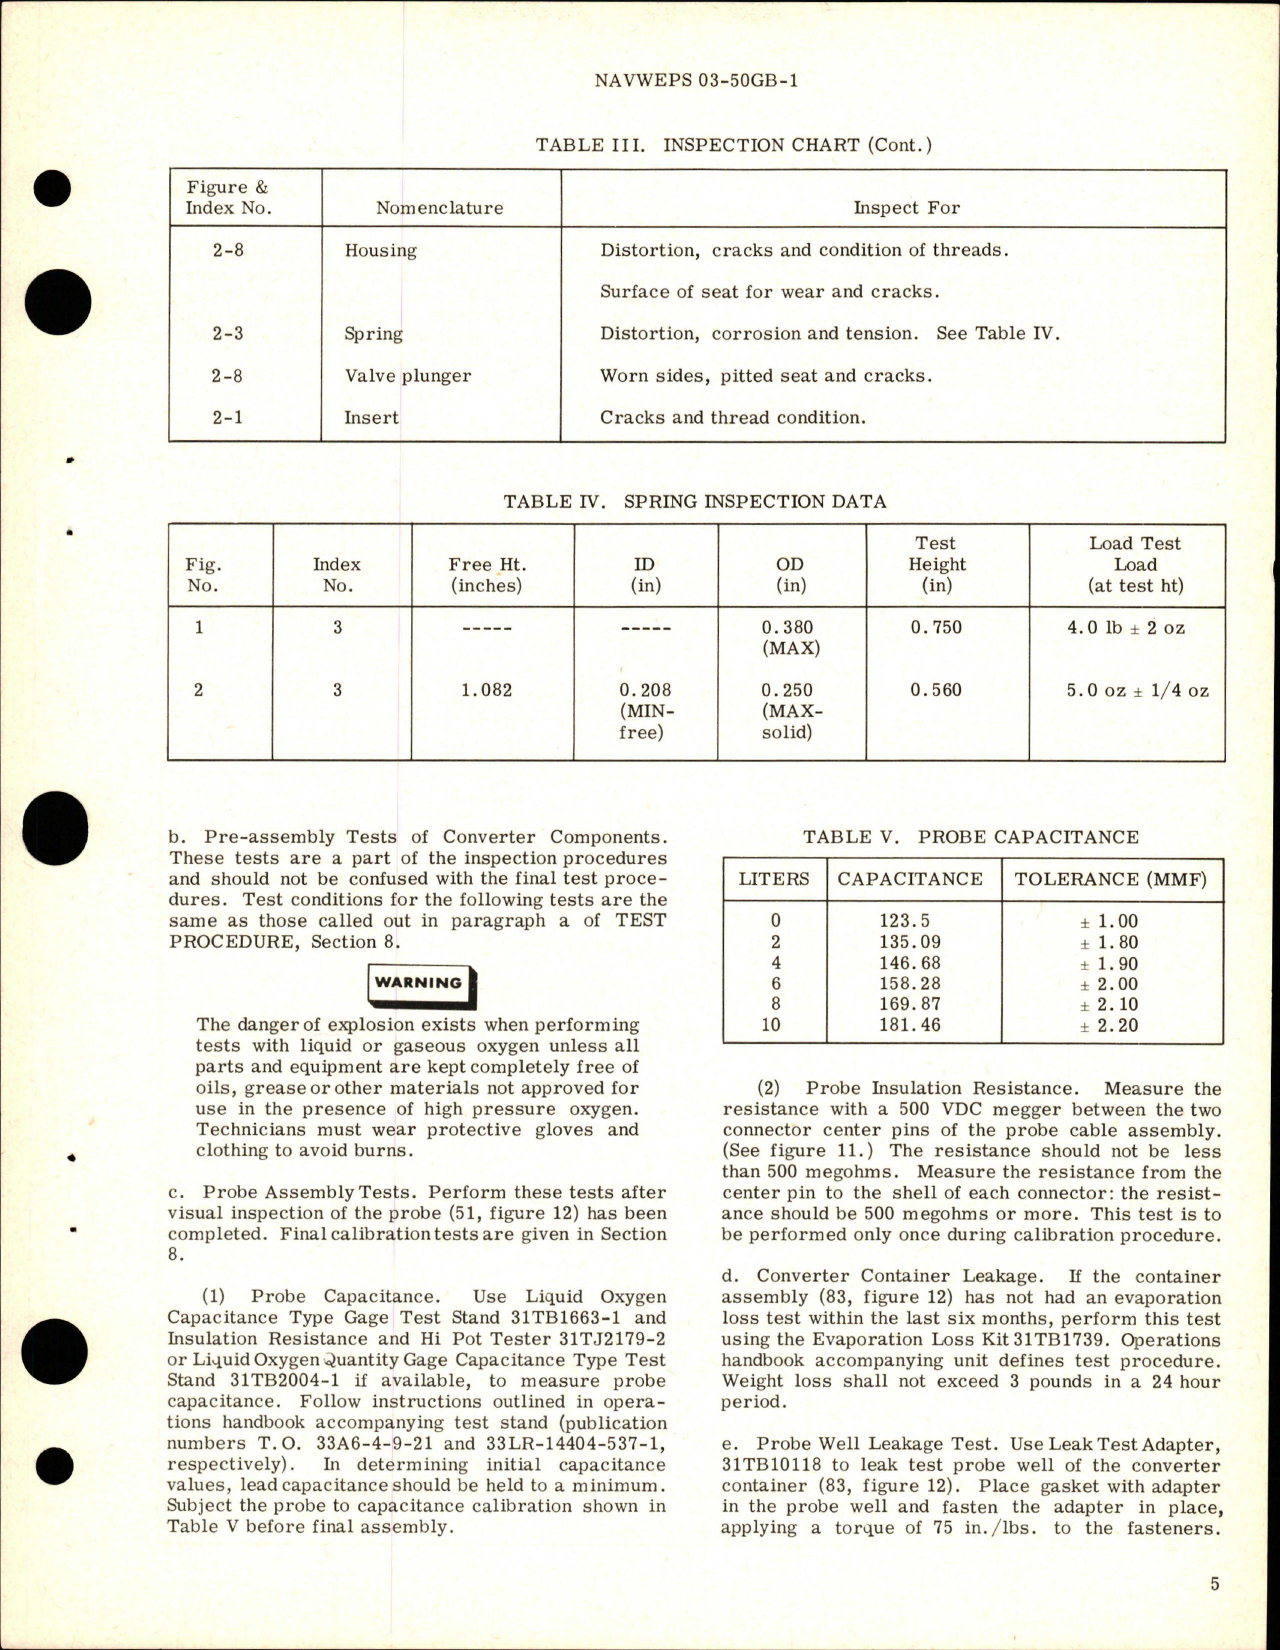 Sample page 7 from AirCorps Library document: Overhaul Instructions with Illustrated Parts Breakdown for Liquid Oxygen Converter - Part 29047-1-A1